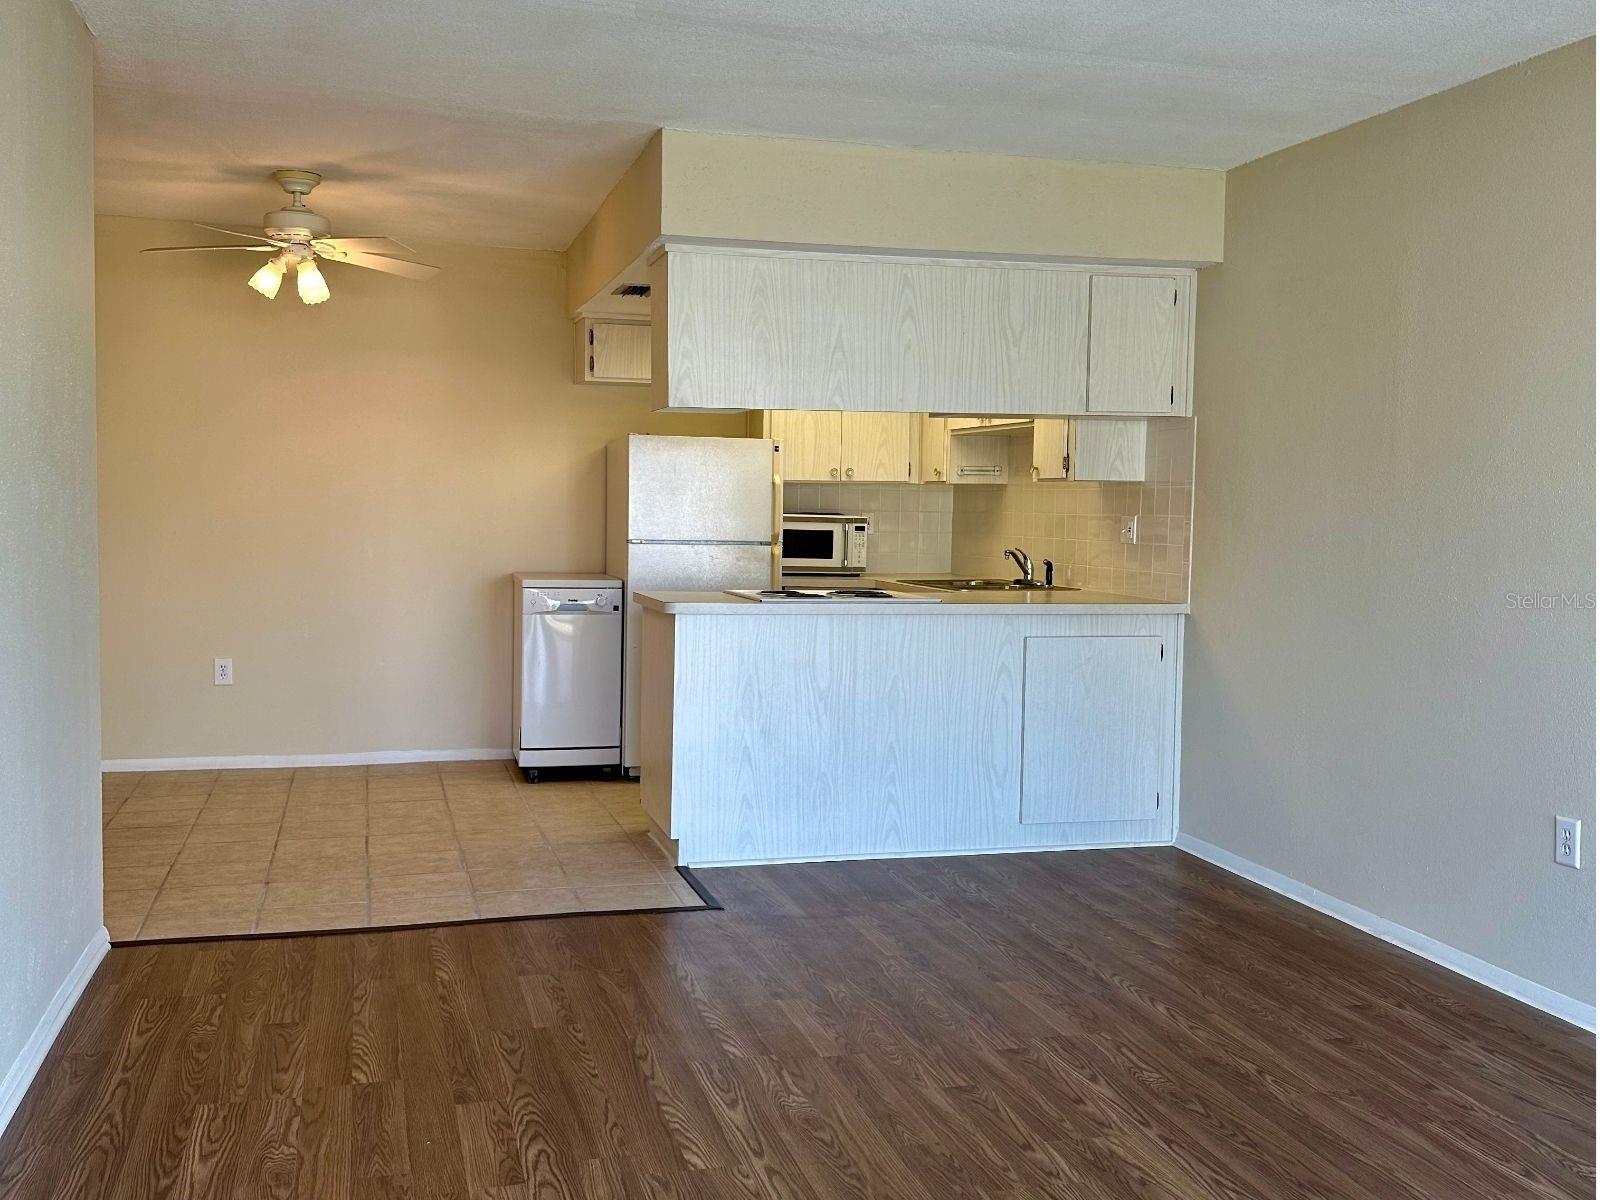 This open floor plan condo exudes cozy vibes with updated paint and floors. Ready for you to call home.